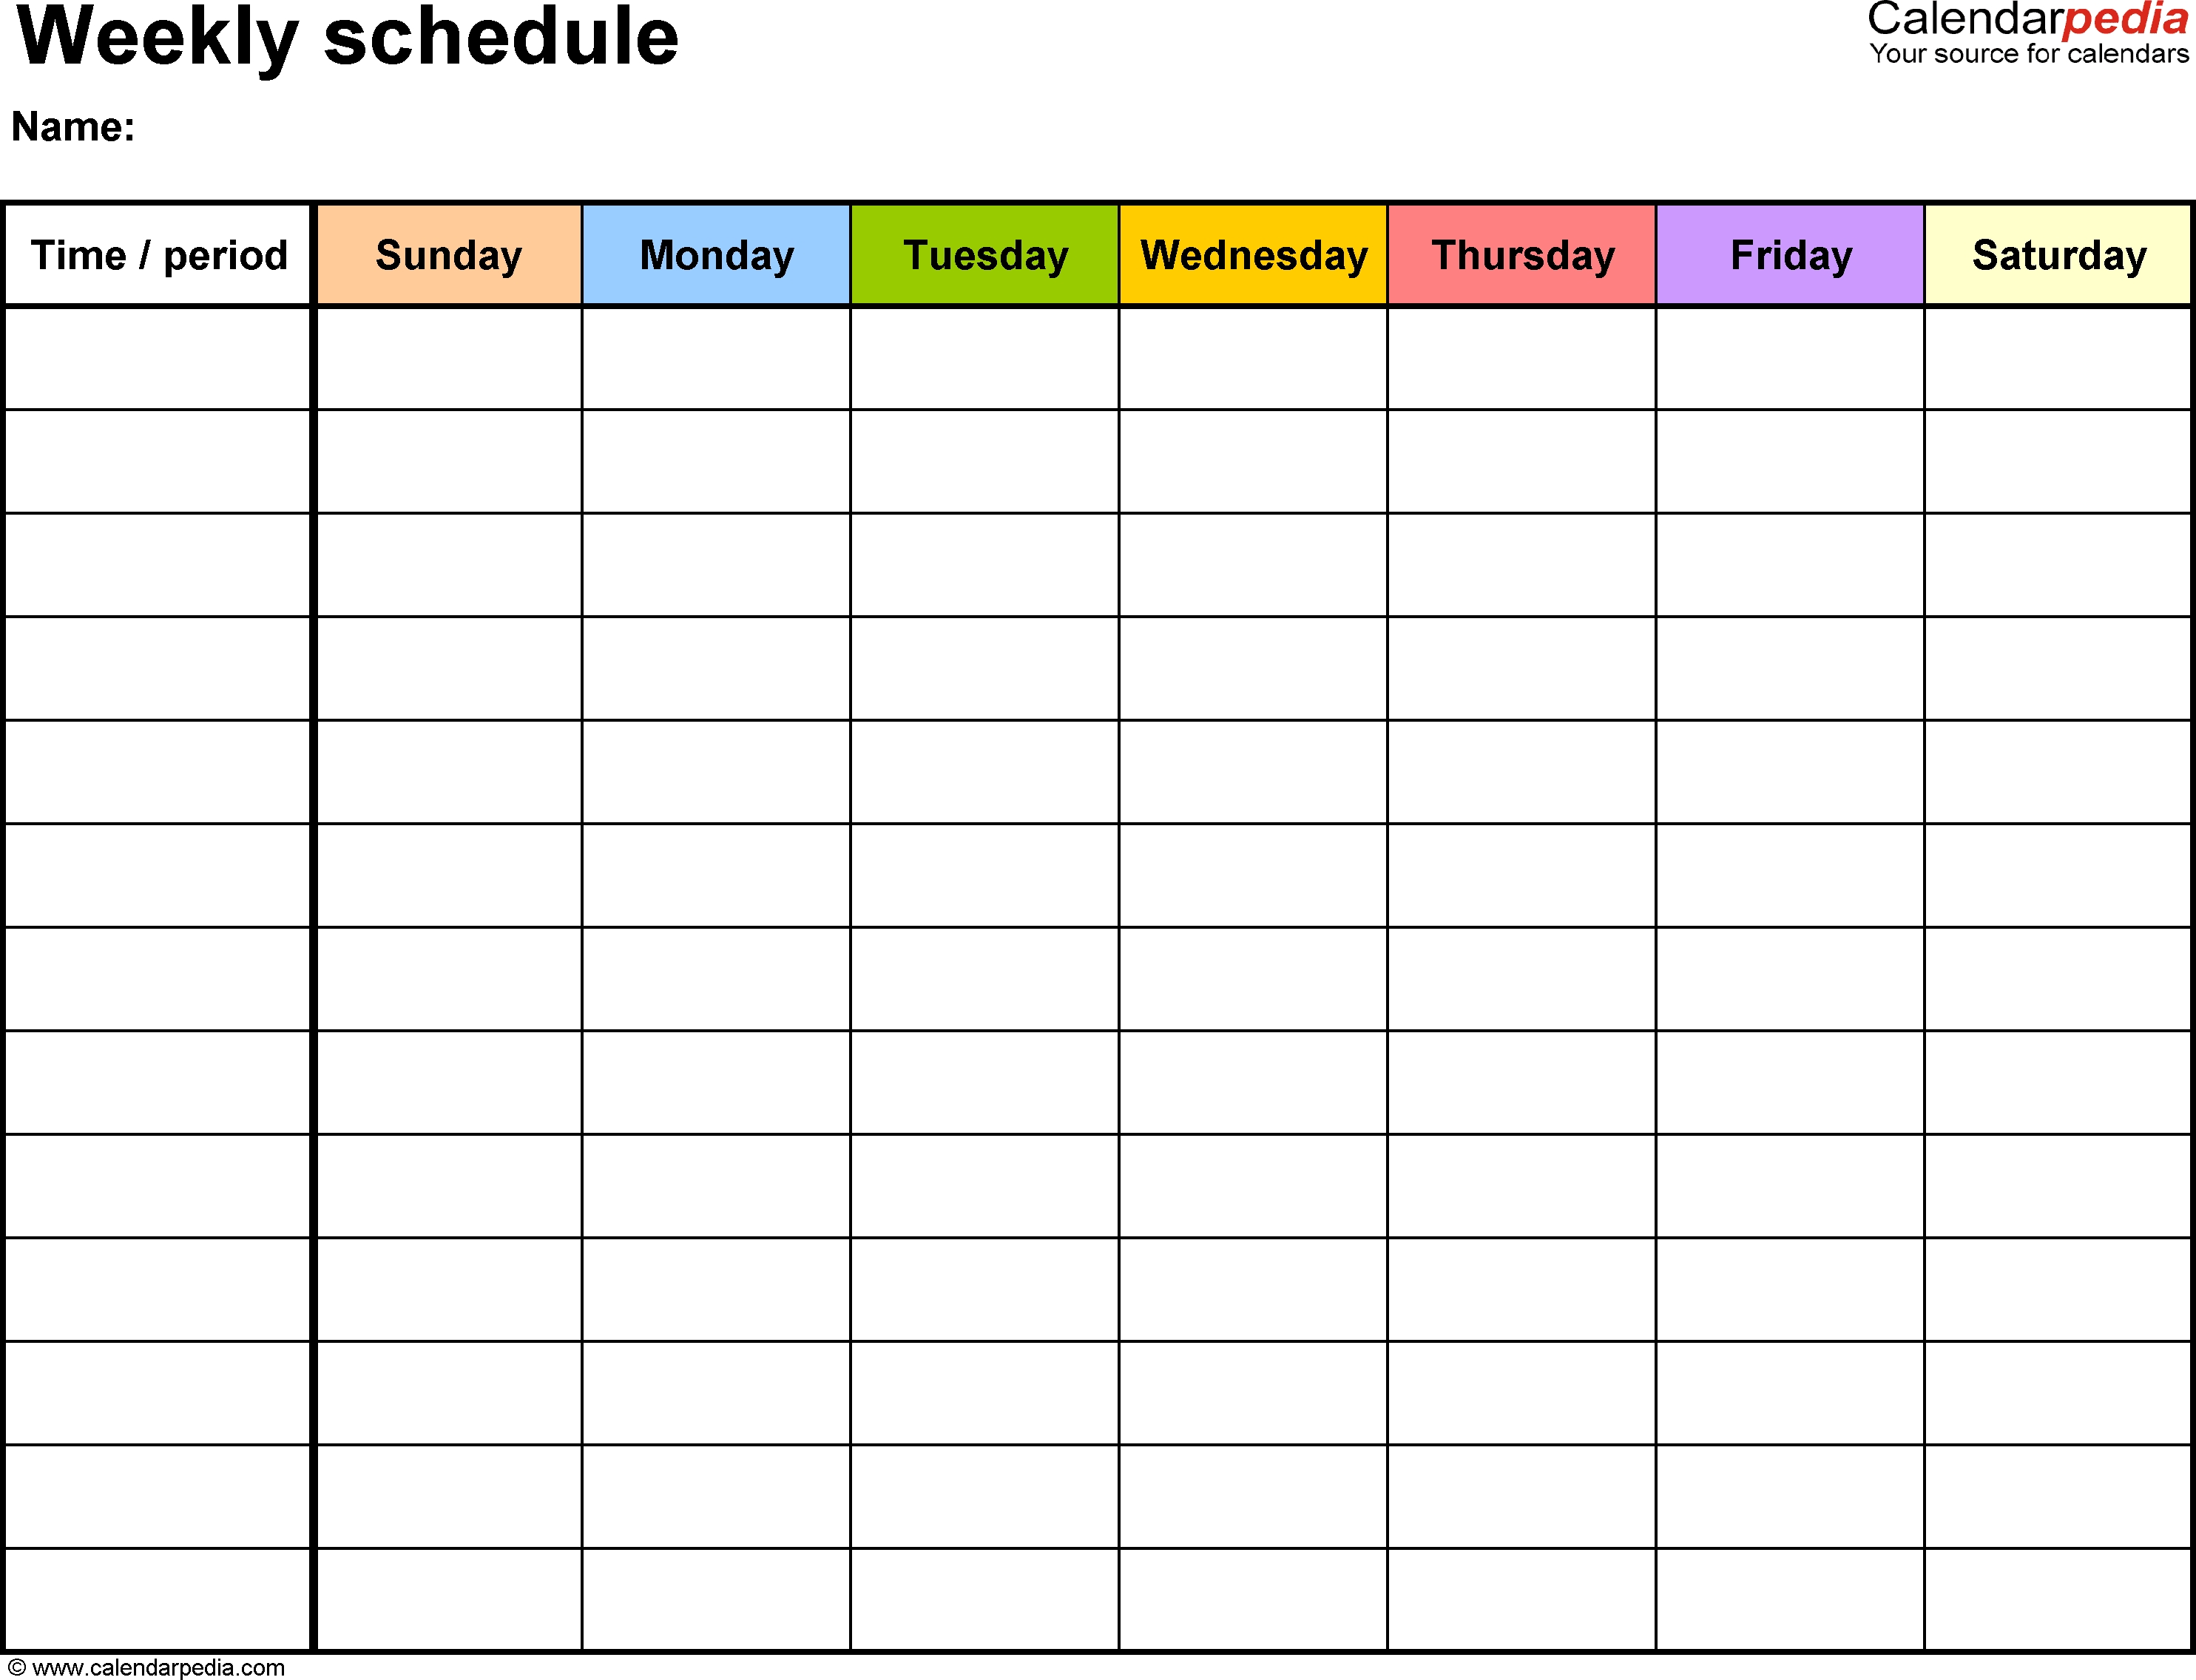 Free Weekly Schedule Templates For Excel - 18 Templates for How To Create A Weekly Calendar